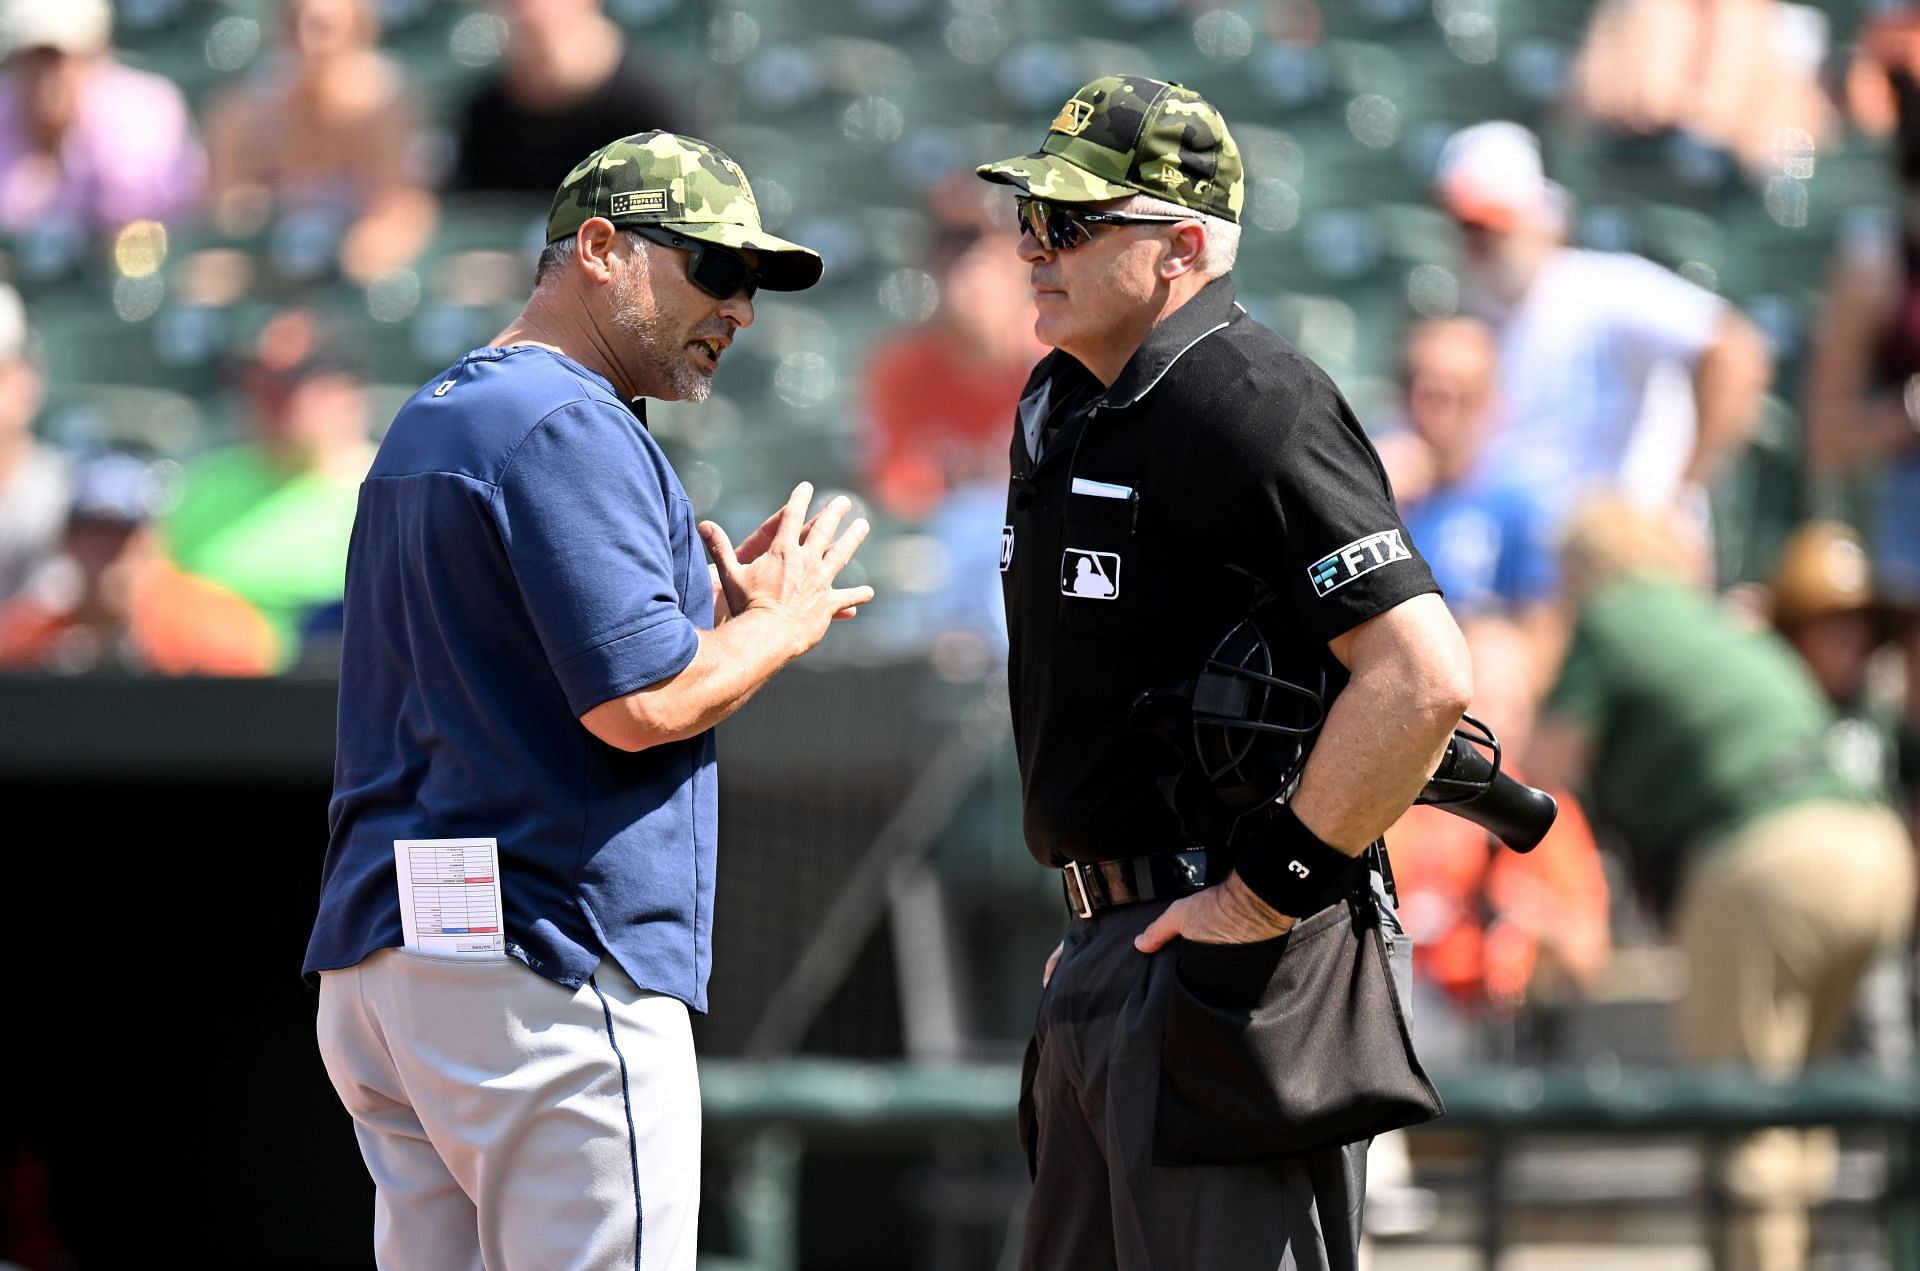 MLB umpires have one of the hardest jobs. Yesterday, umpire Tom Haillon had no problem using some expletives to amplify his point.